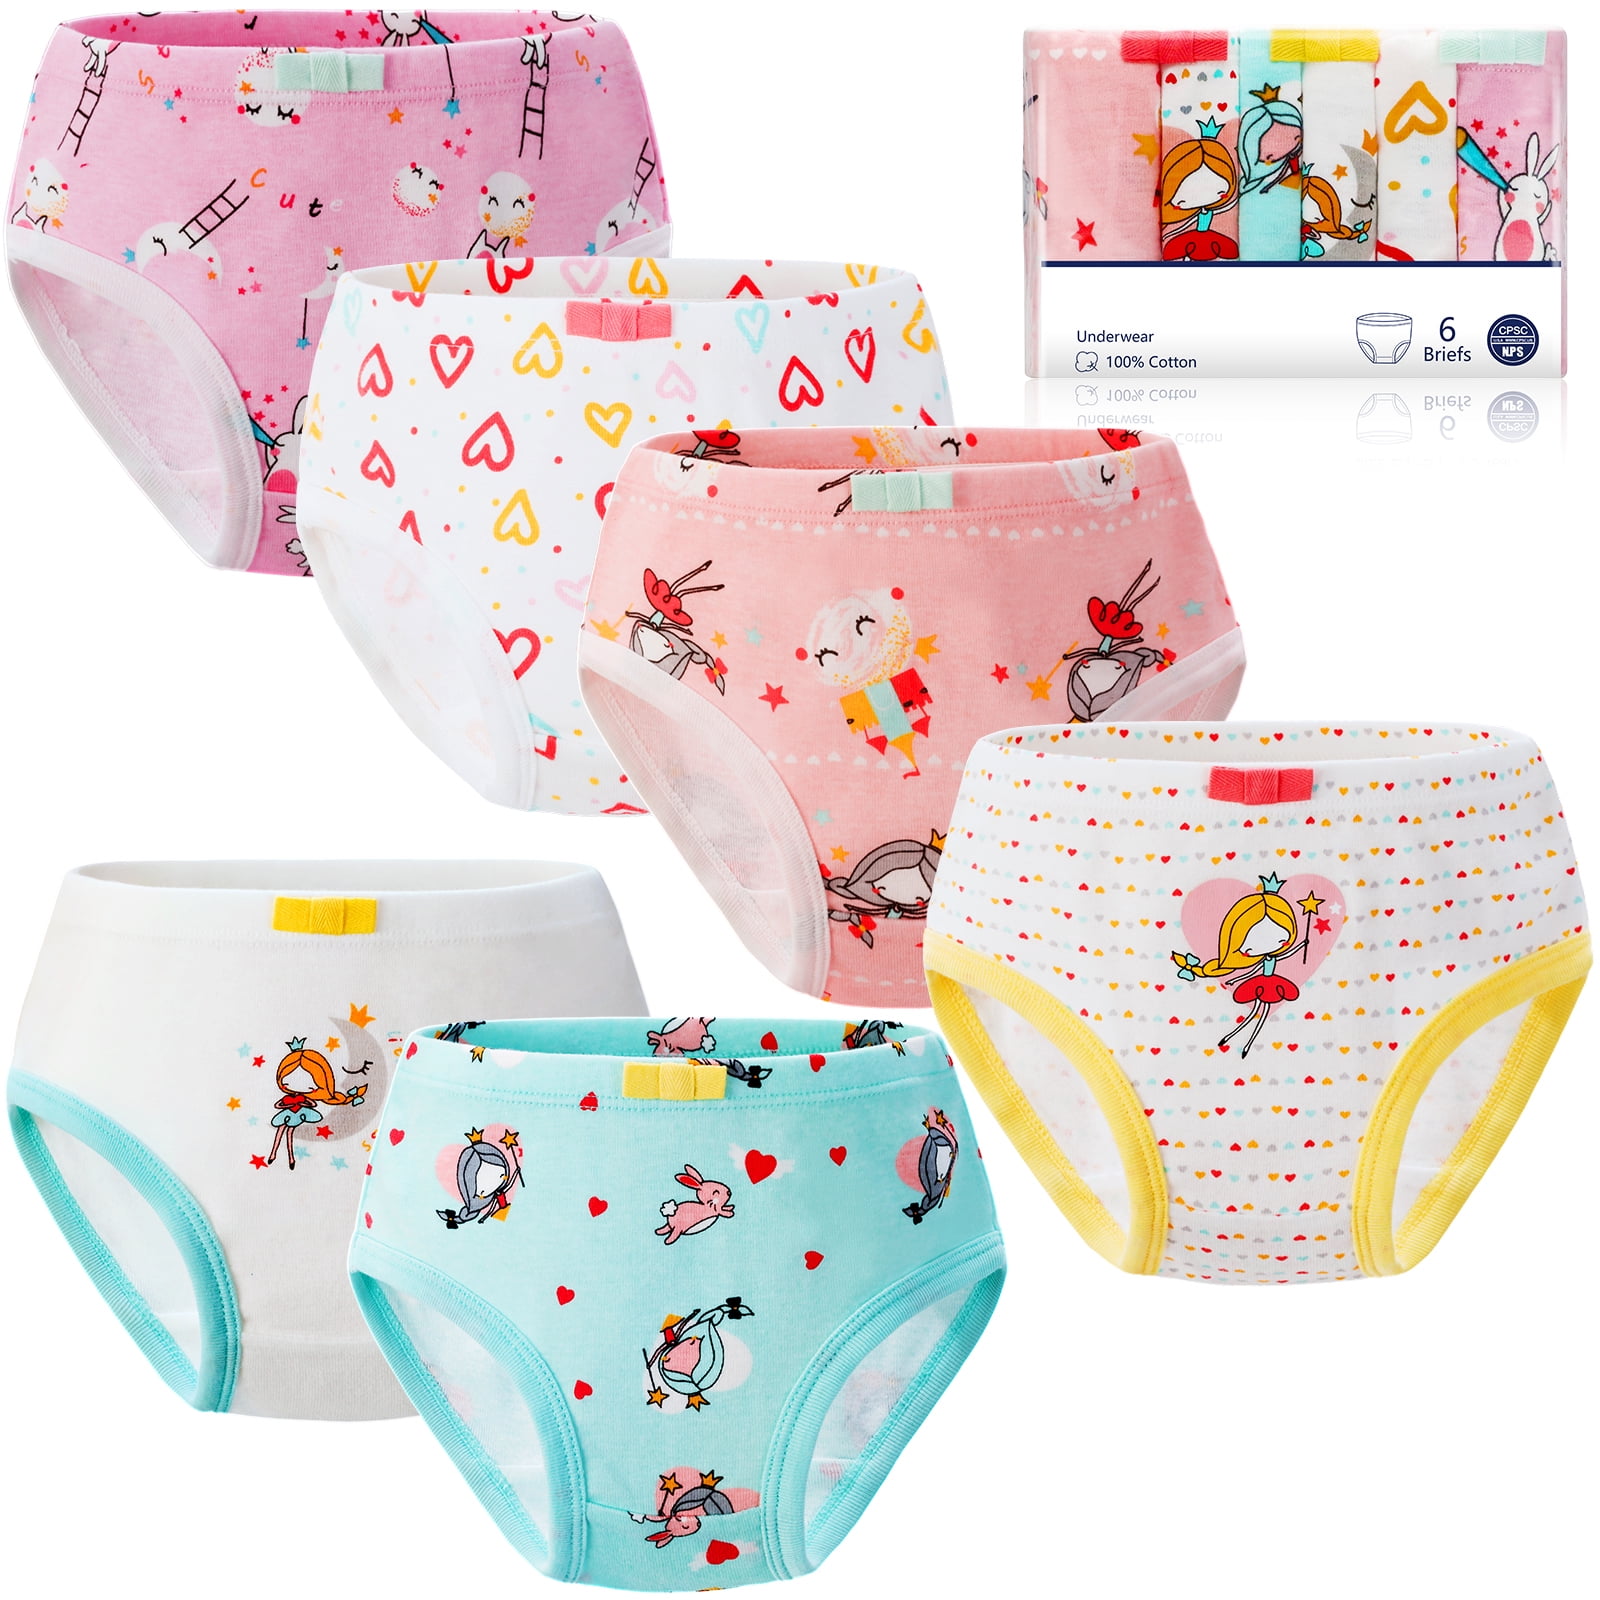 5 Pcs/lot Girls Panties Cotton Kids Beautiful Underwear Cartoon Children Briefs  Girls Breathable Triangle Underpants For Girls Color: 5-20GS003, Kid Size:  L (For 5-7 Years)